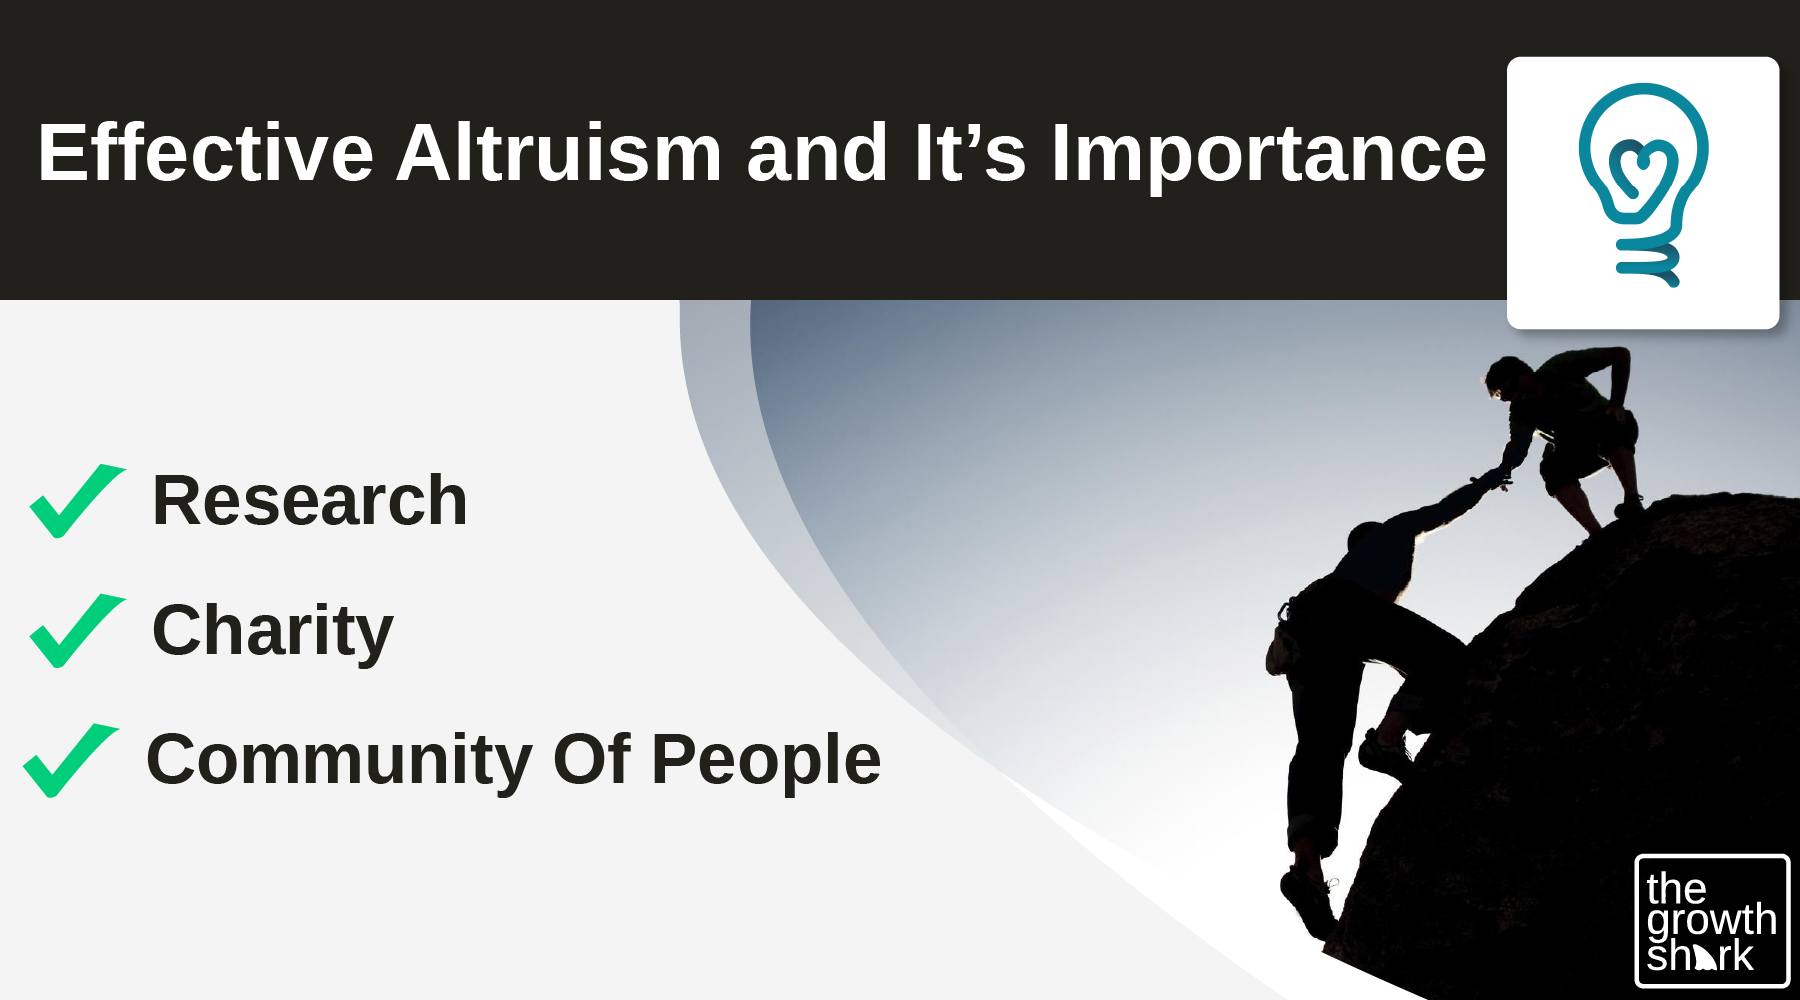 Why is Effective Altruism Important?